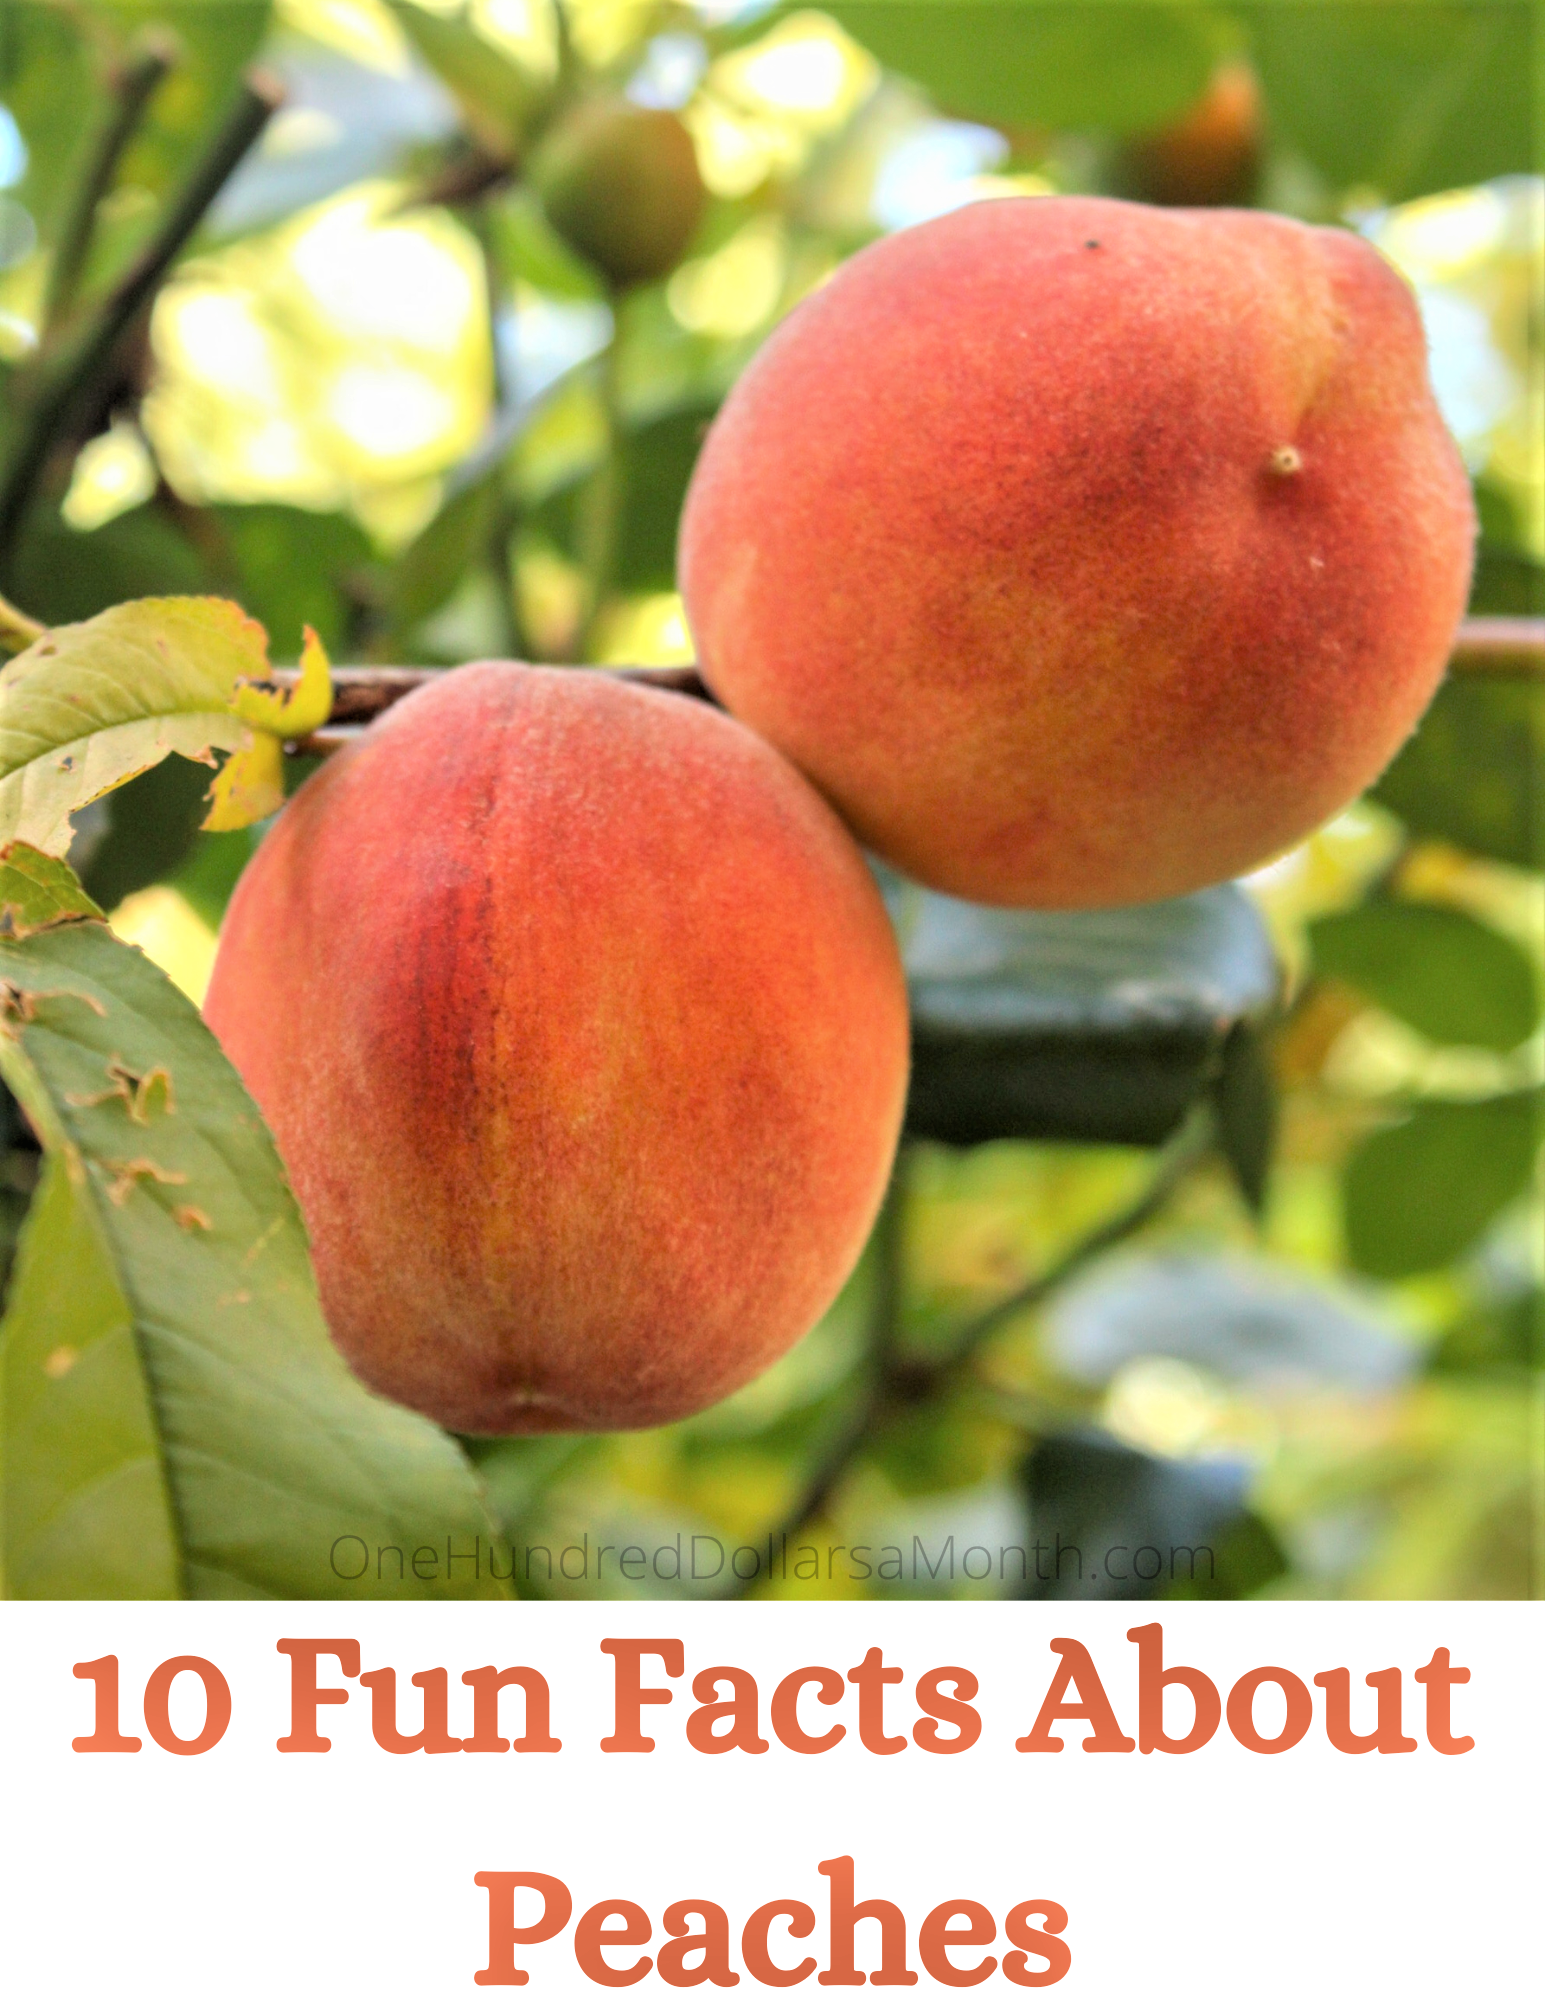 10 Fun Facts About Peaches